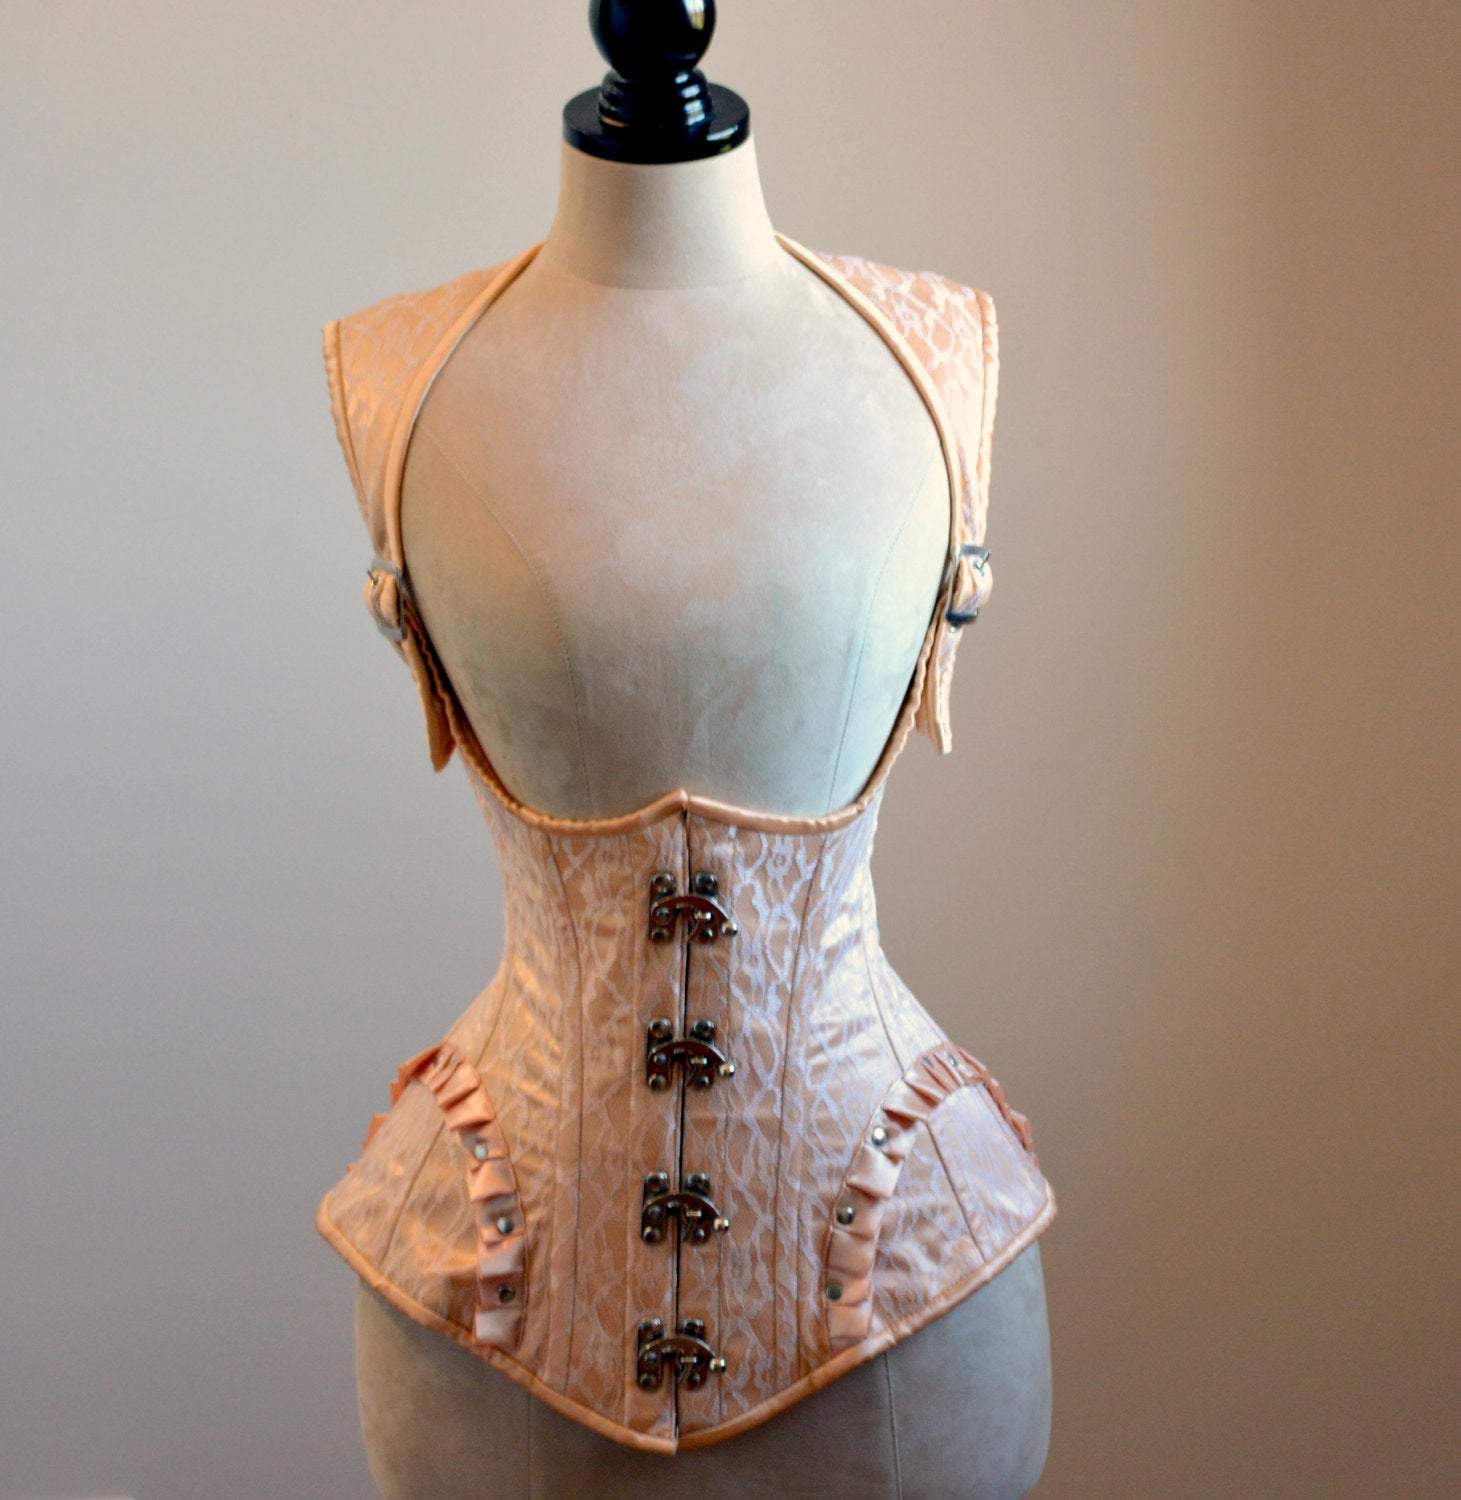 5 Steampunk Corsets We Love. While we love the thrift shop hunting